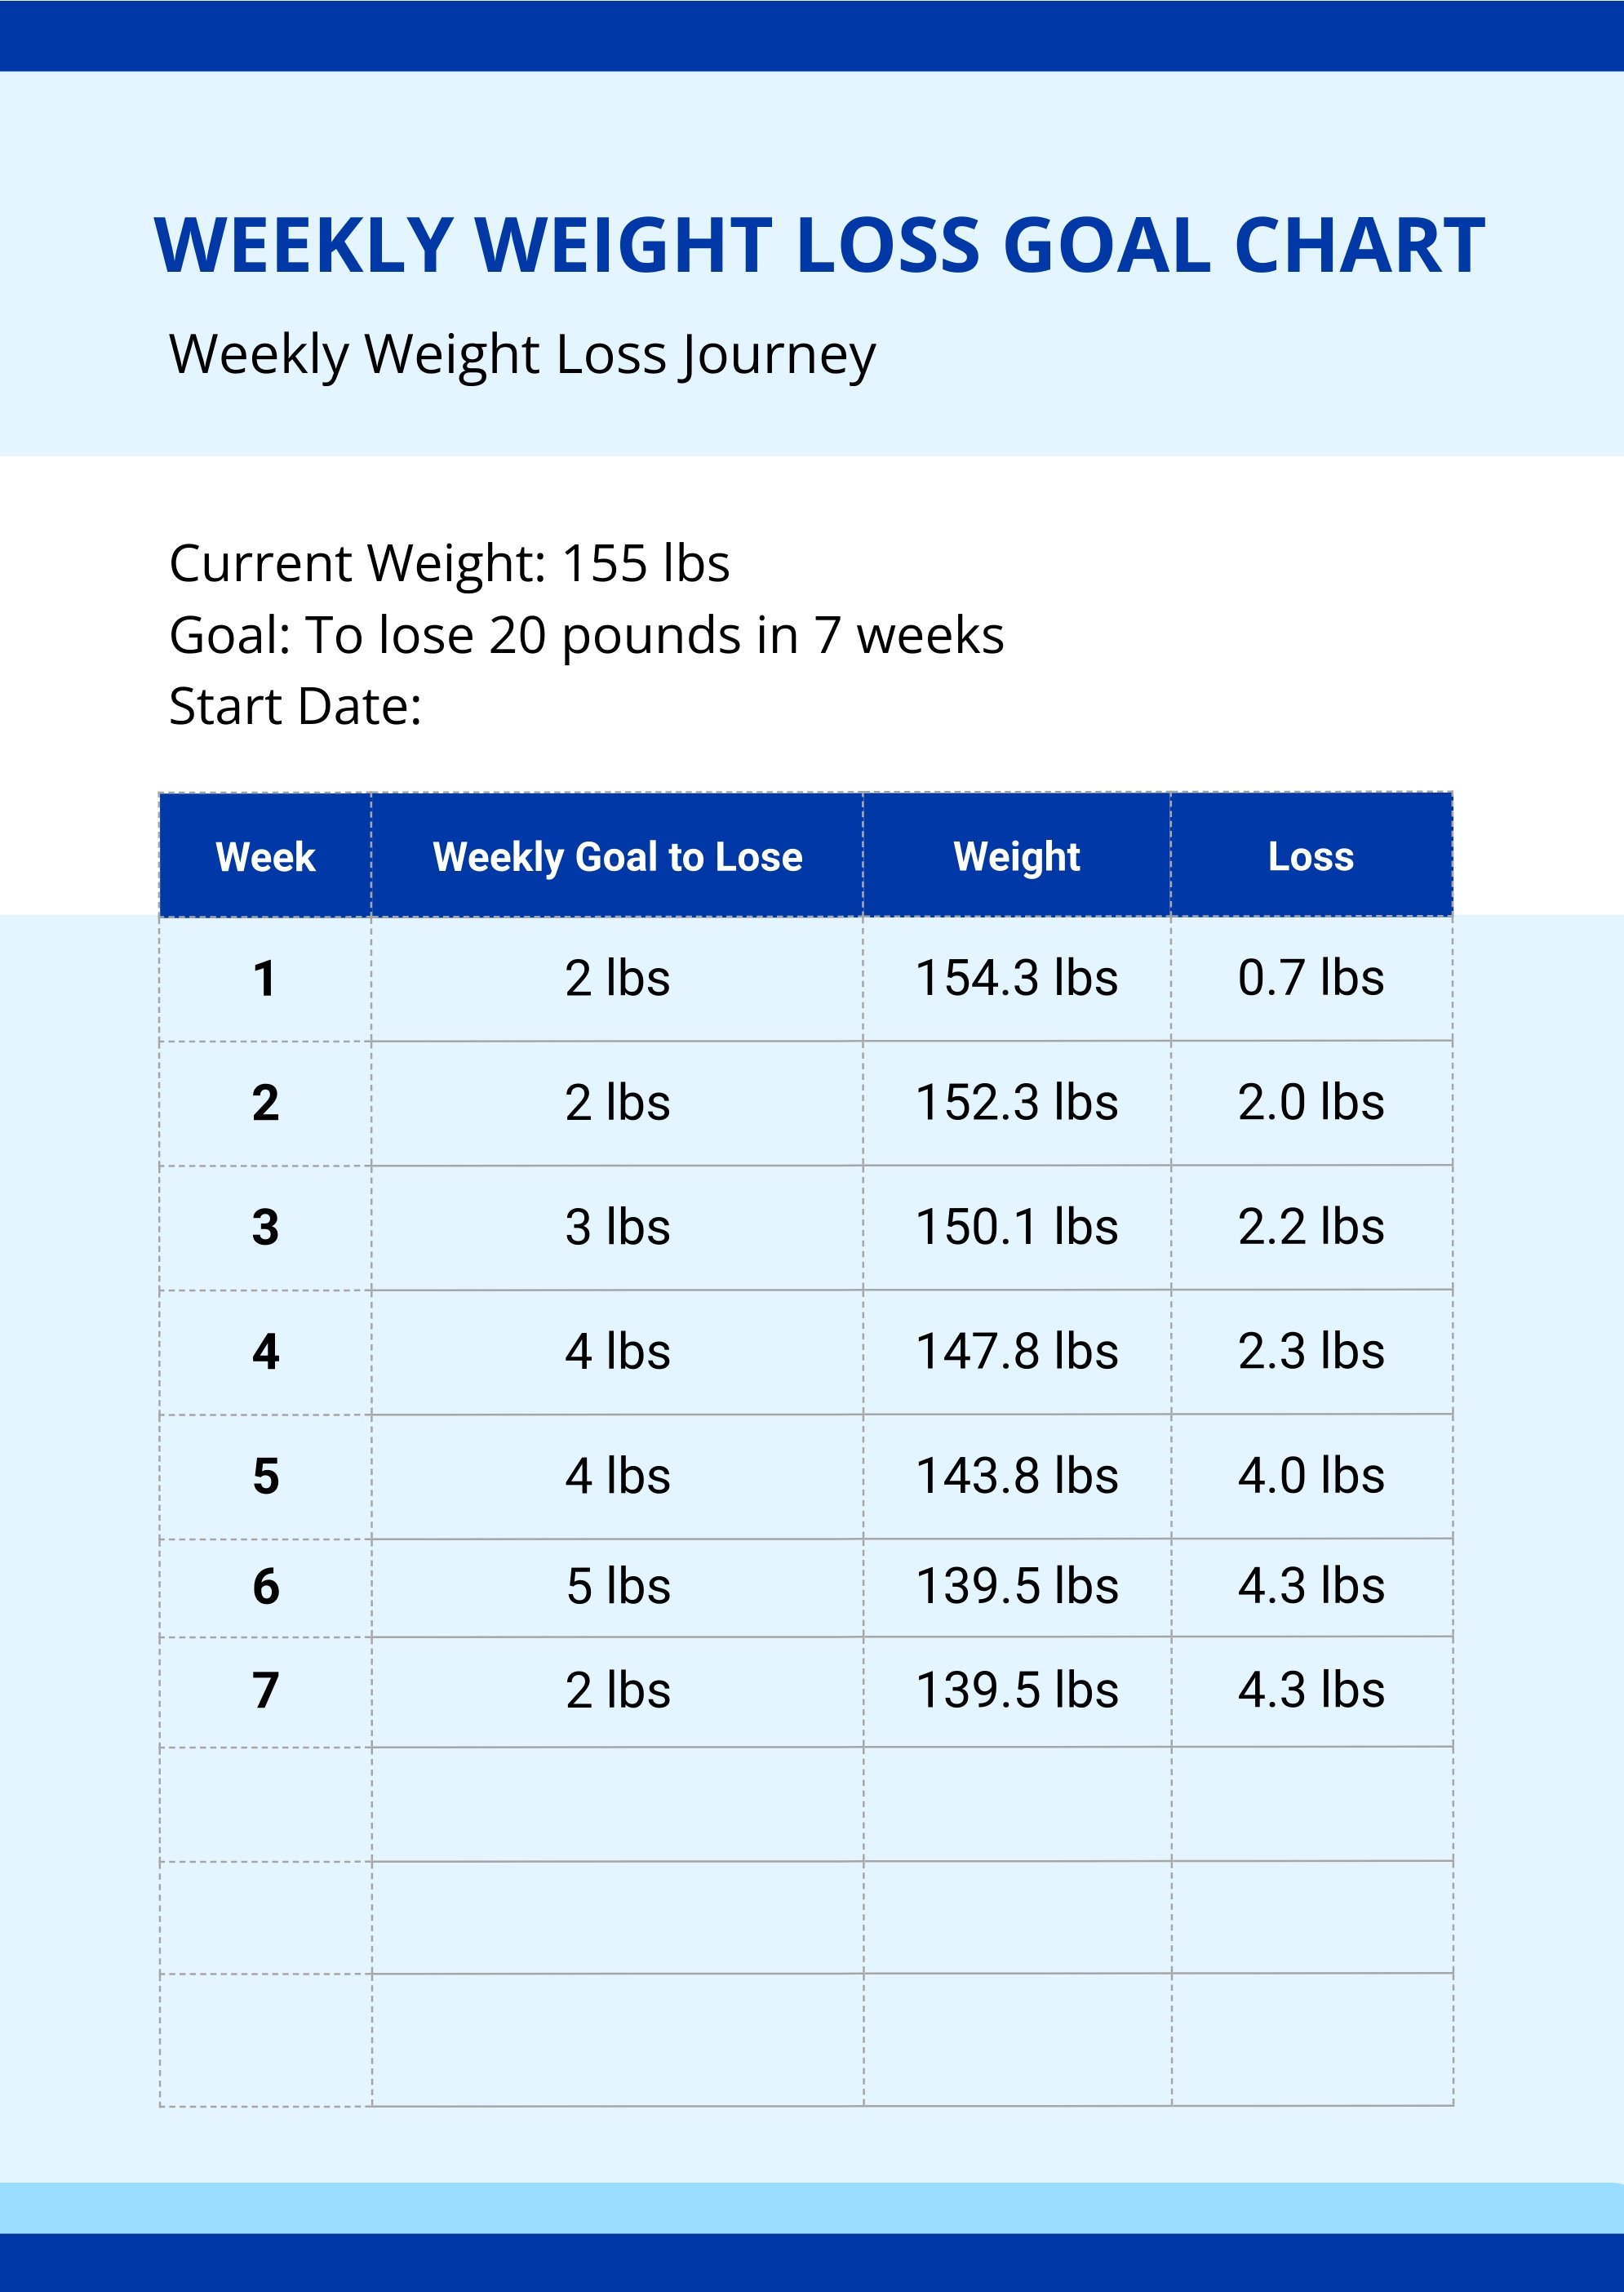 Weekly Weight Loss Goal Chart